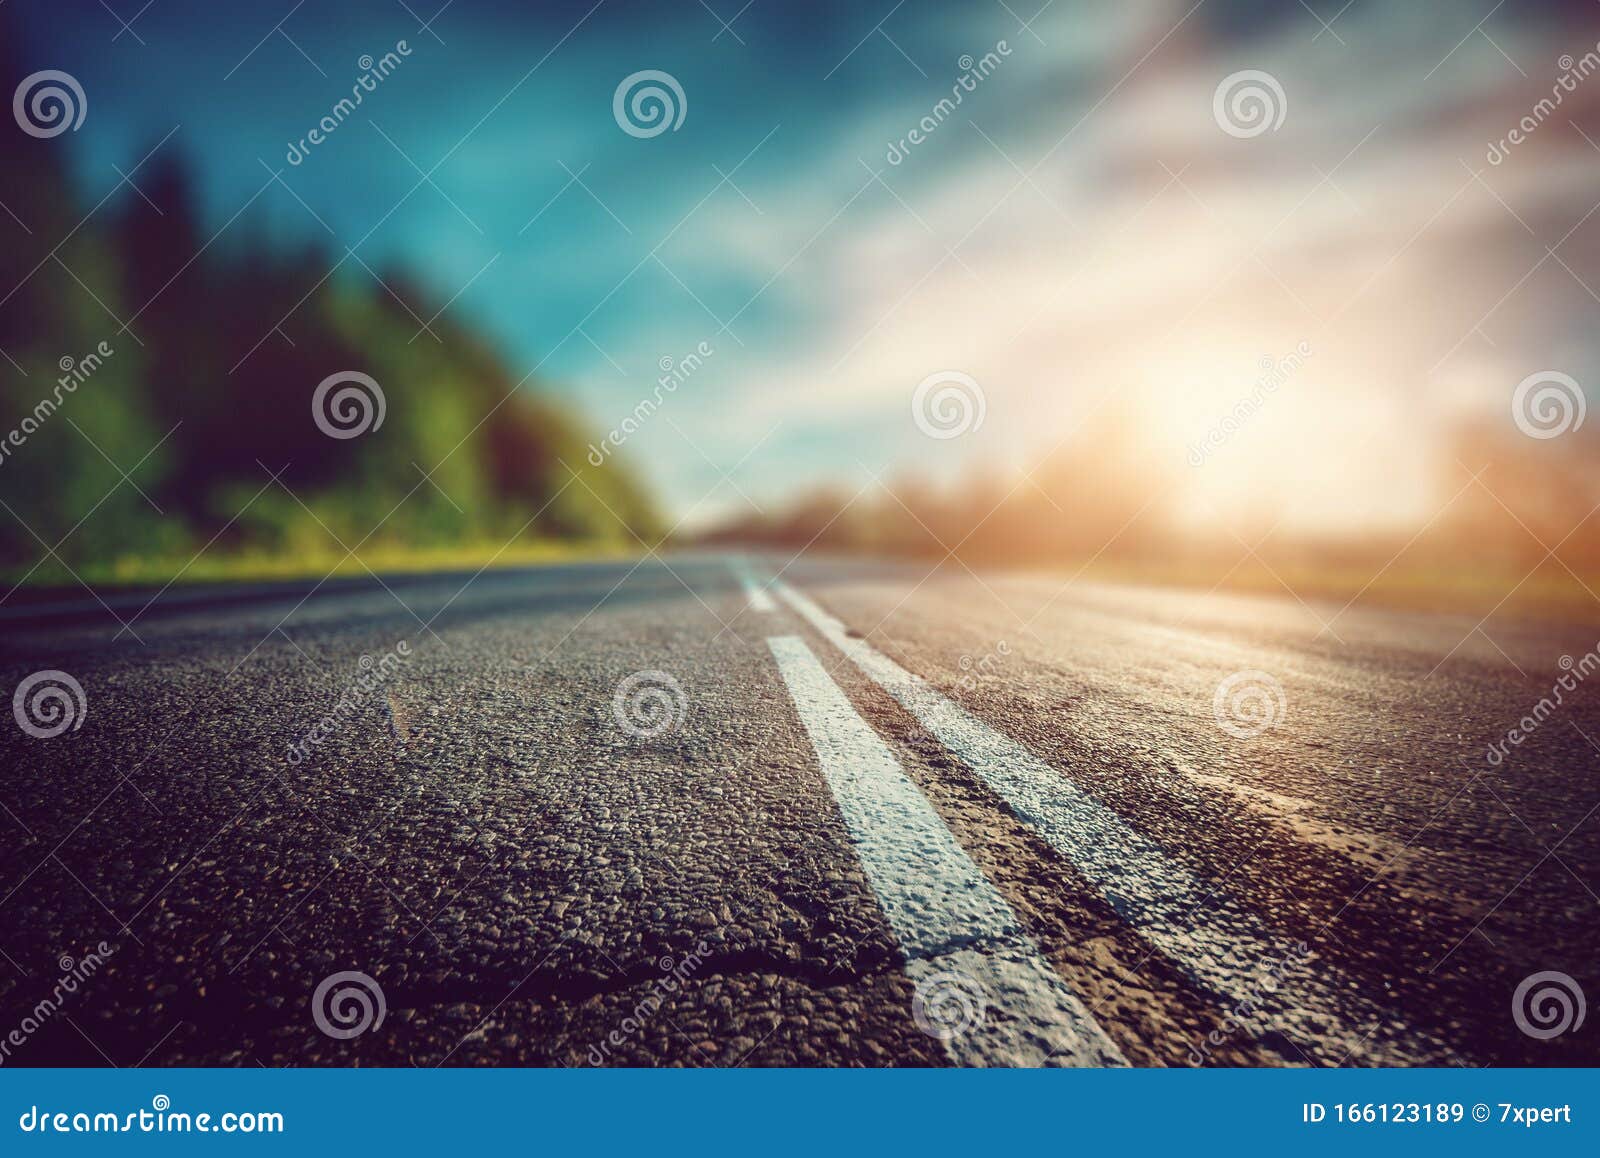 Highway Background Stock Photos Images and Backgrounds for Free Download